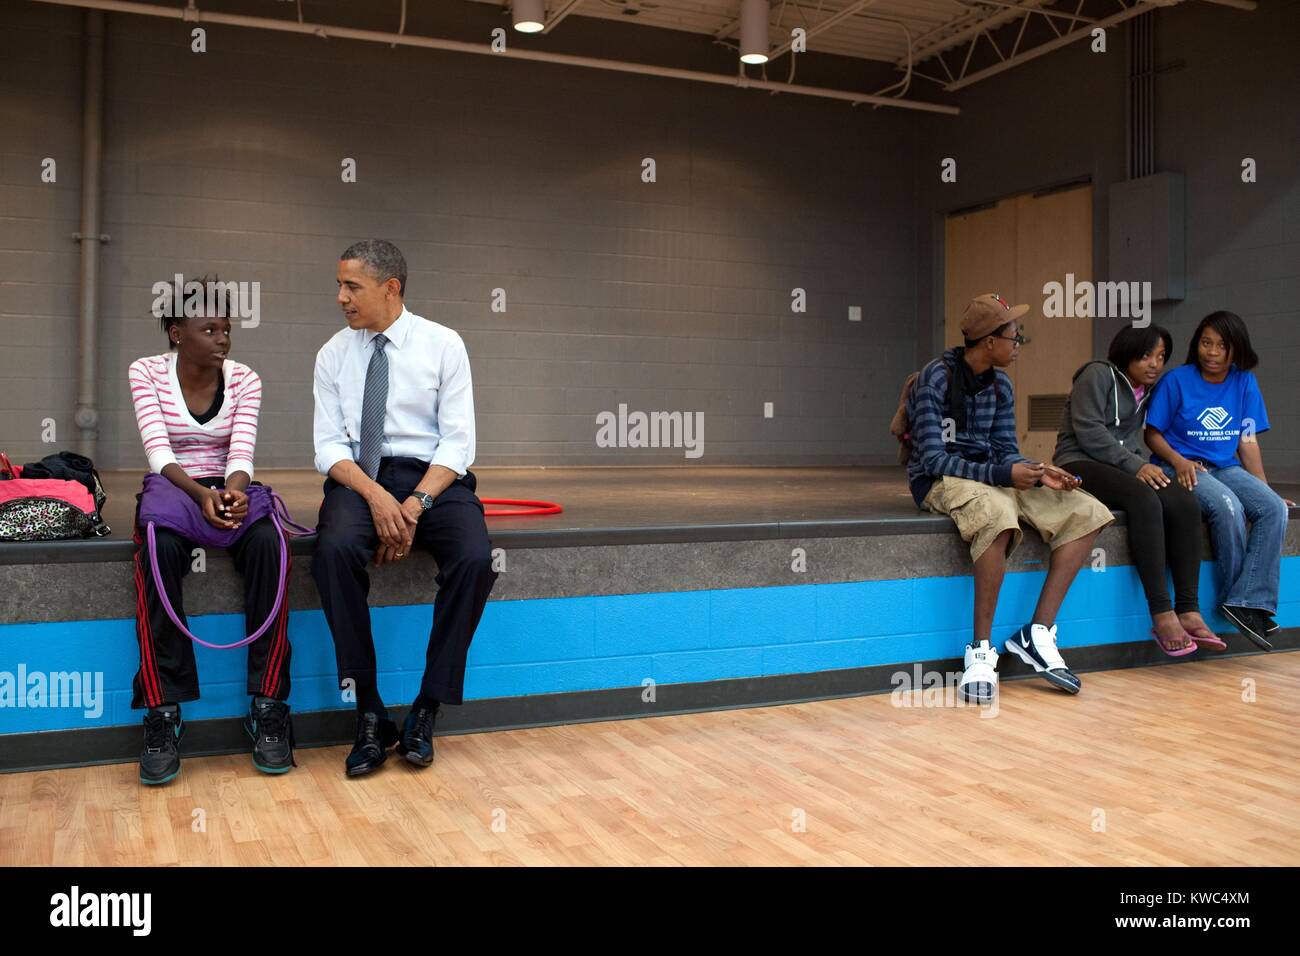 President Obama talks to kids at the Boys and Girls Clubs of Cleveland, on Broadway Avenue. June 14, 2012. (BSLOC 2015 13 159) Stock Photo